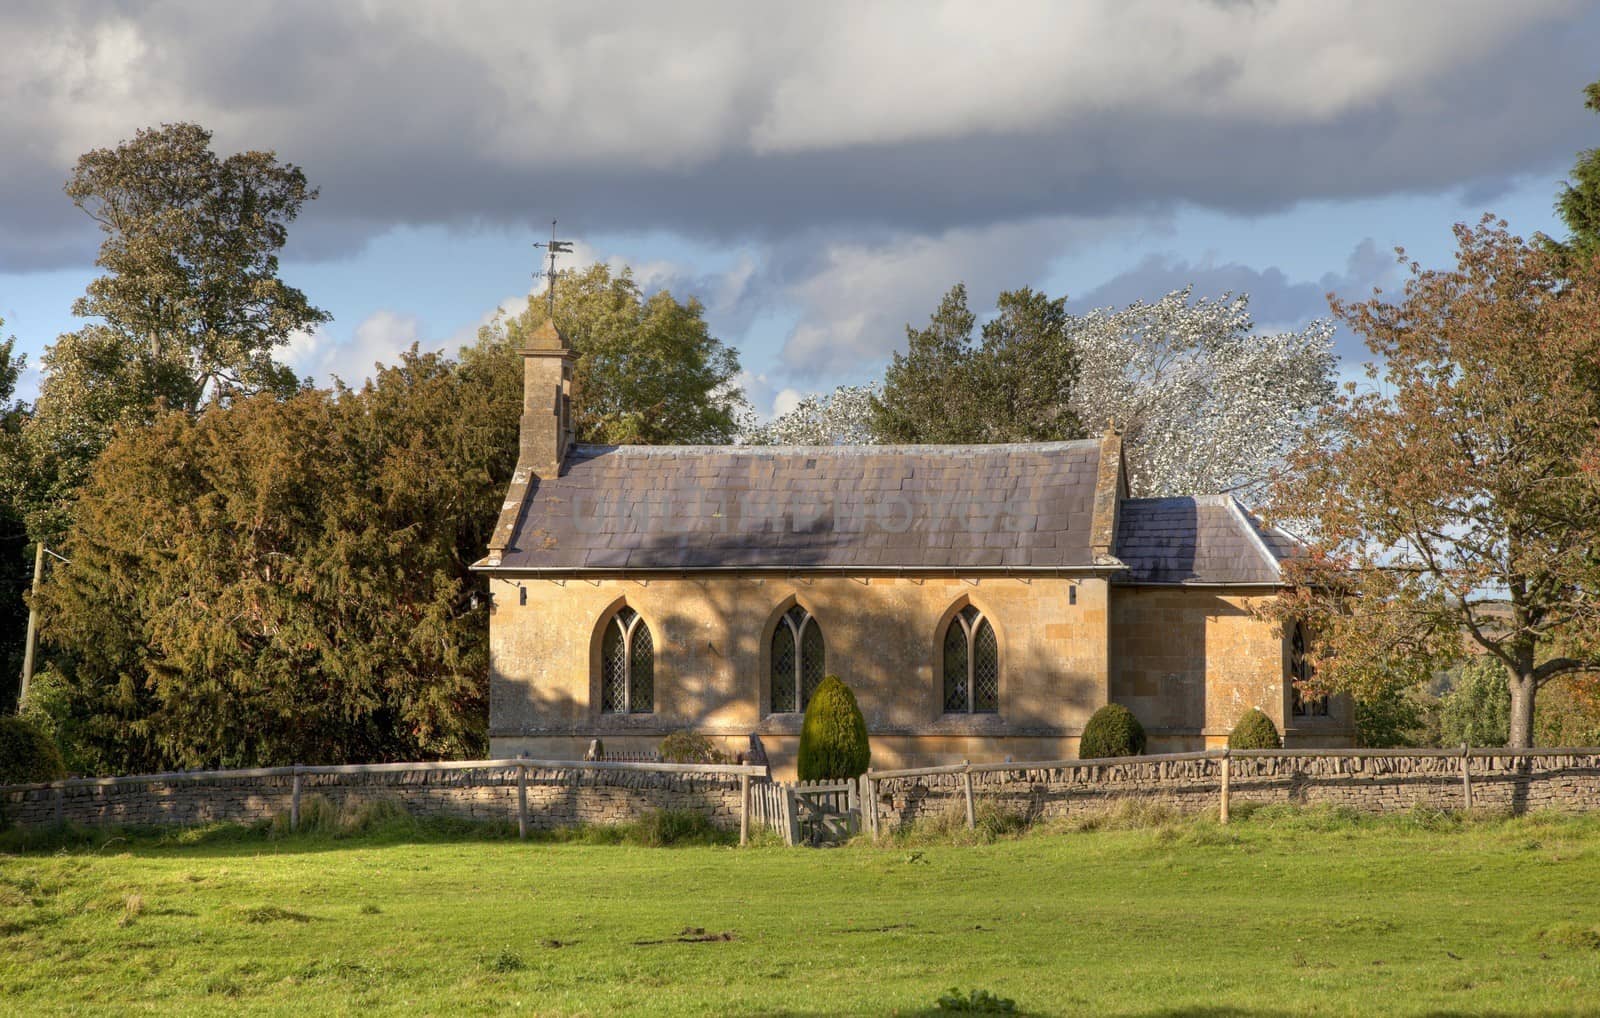 The small Cotswold chapel at Aston subedge near Chipping Campden, Gloucestershire, England.